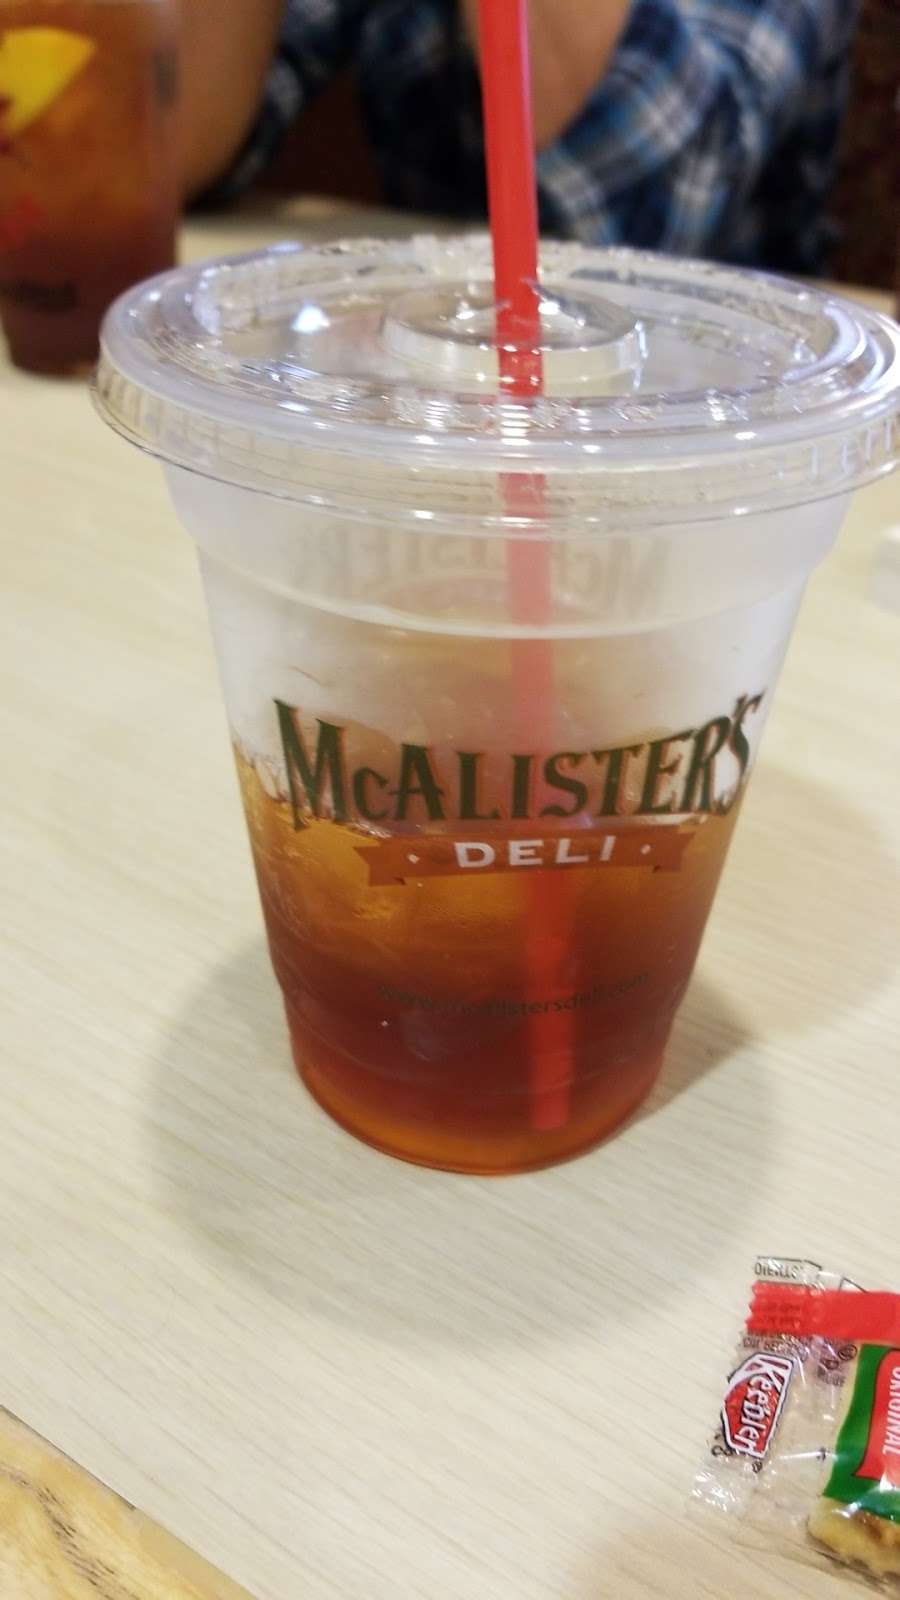 McAlisters Deli | 1410 E Main St, Plainfield, IN 46168 | Phone: (317) 203-6649